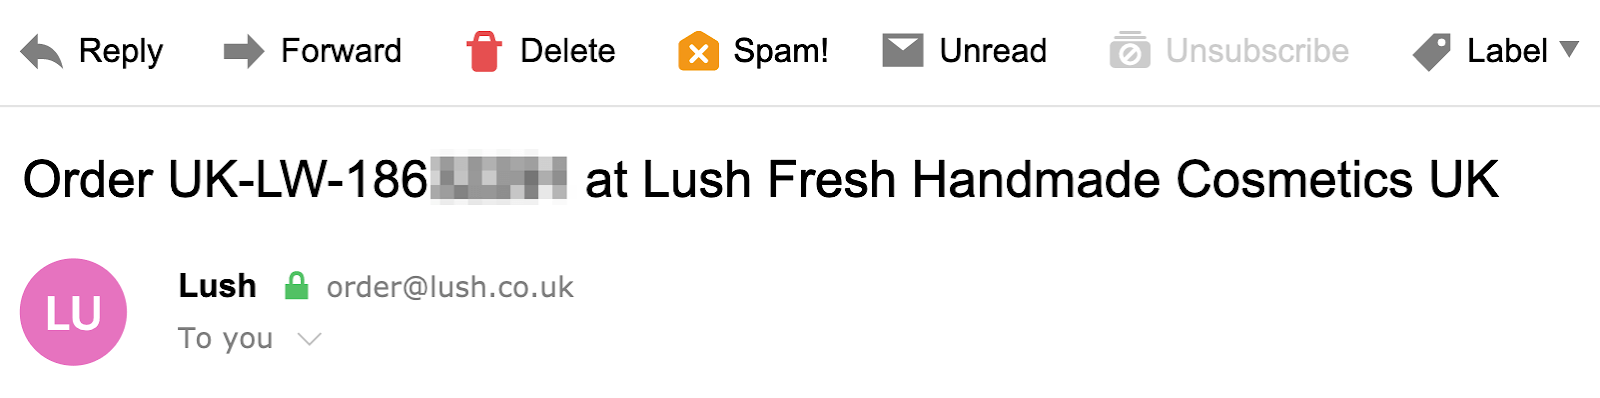 order confirmation email subject line by Lush